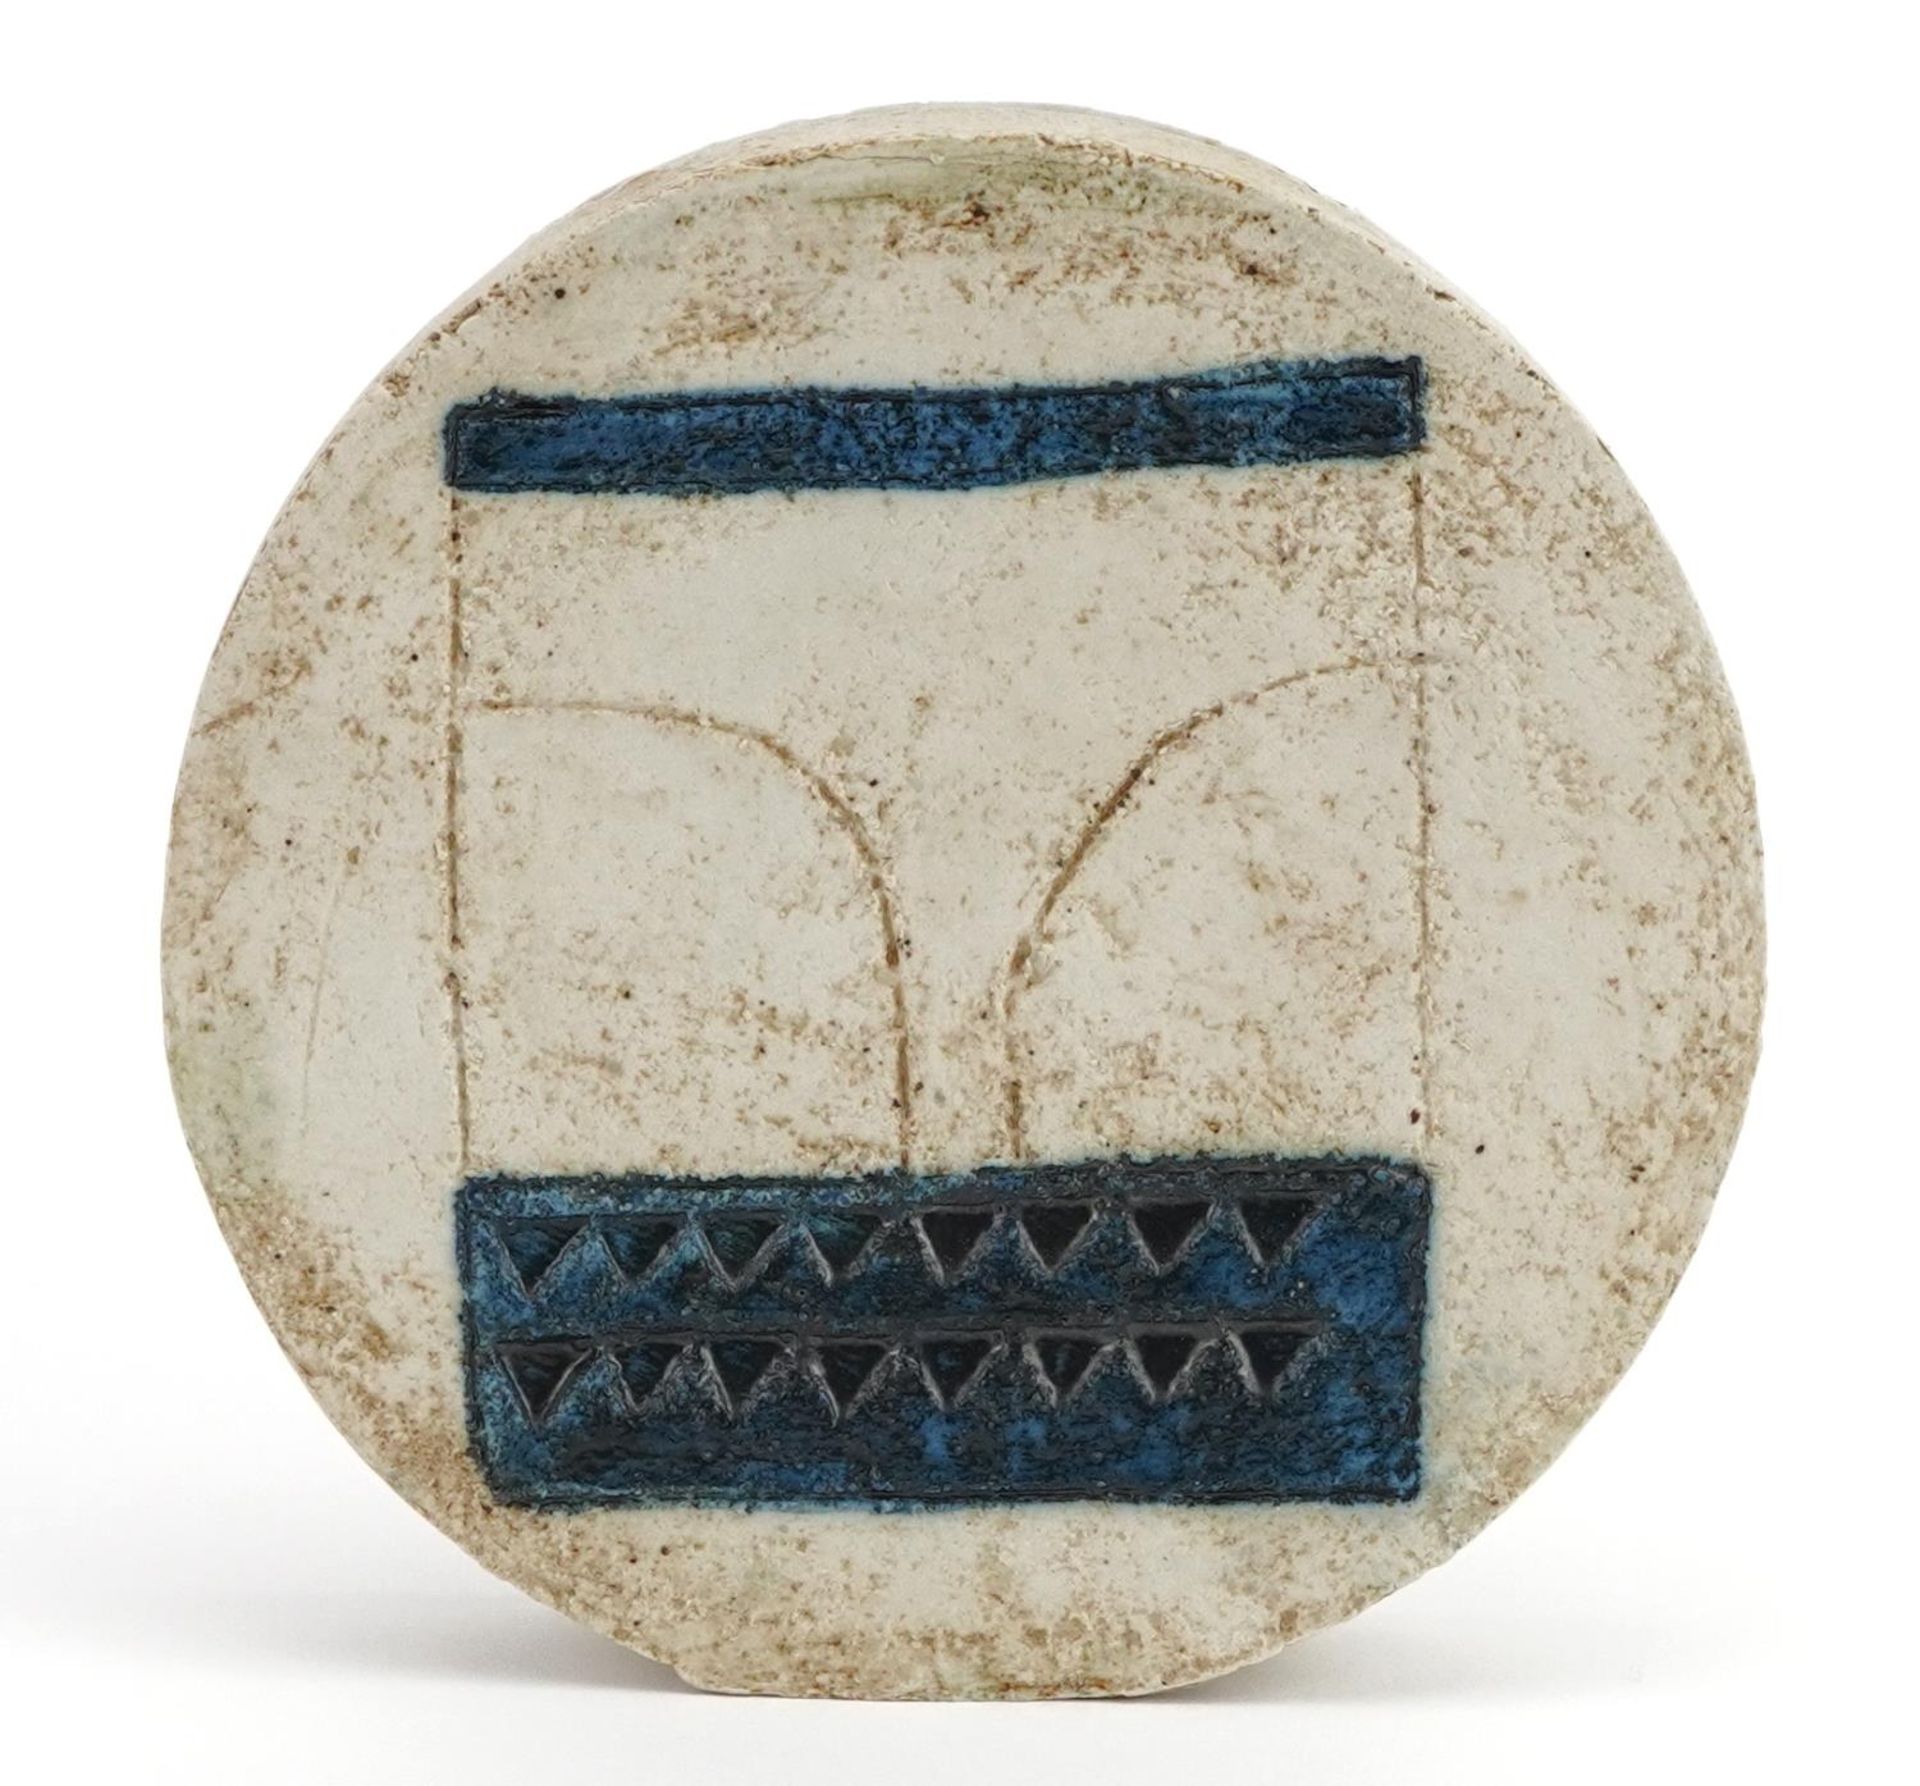 Anne Lewis for Troika, St Ives pottery wheel vase hand painted and incised with an abstract